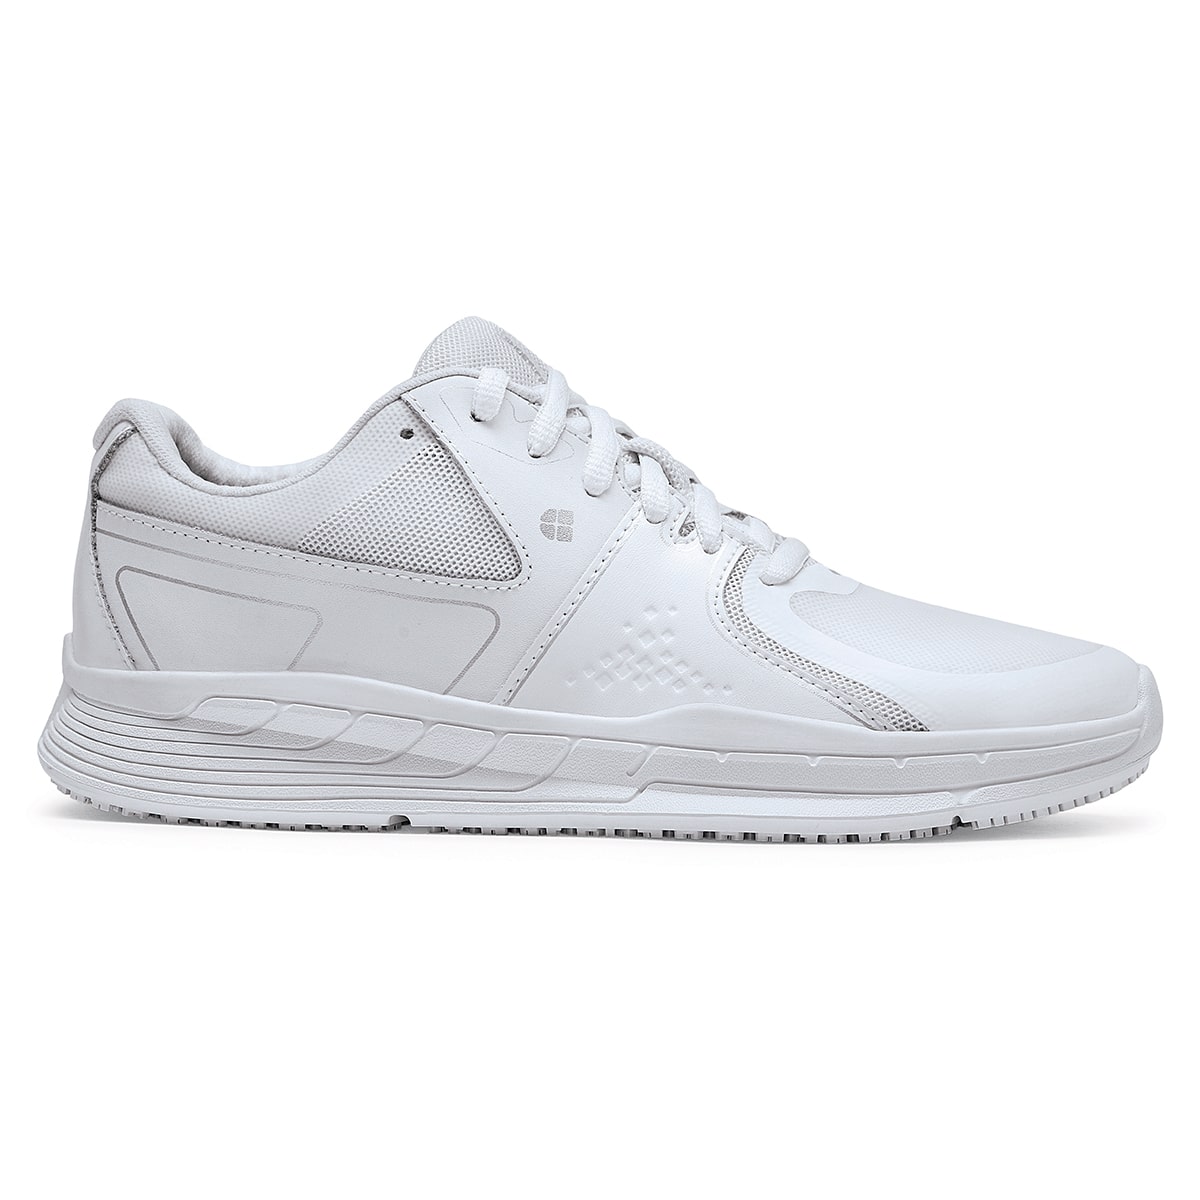 The Condor Women's White from Shoes for Crews is a slip-resistant shoe with laces, with additional padding and a removable cushioned insole, seen from the right.